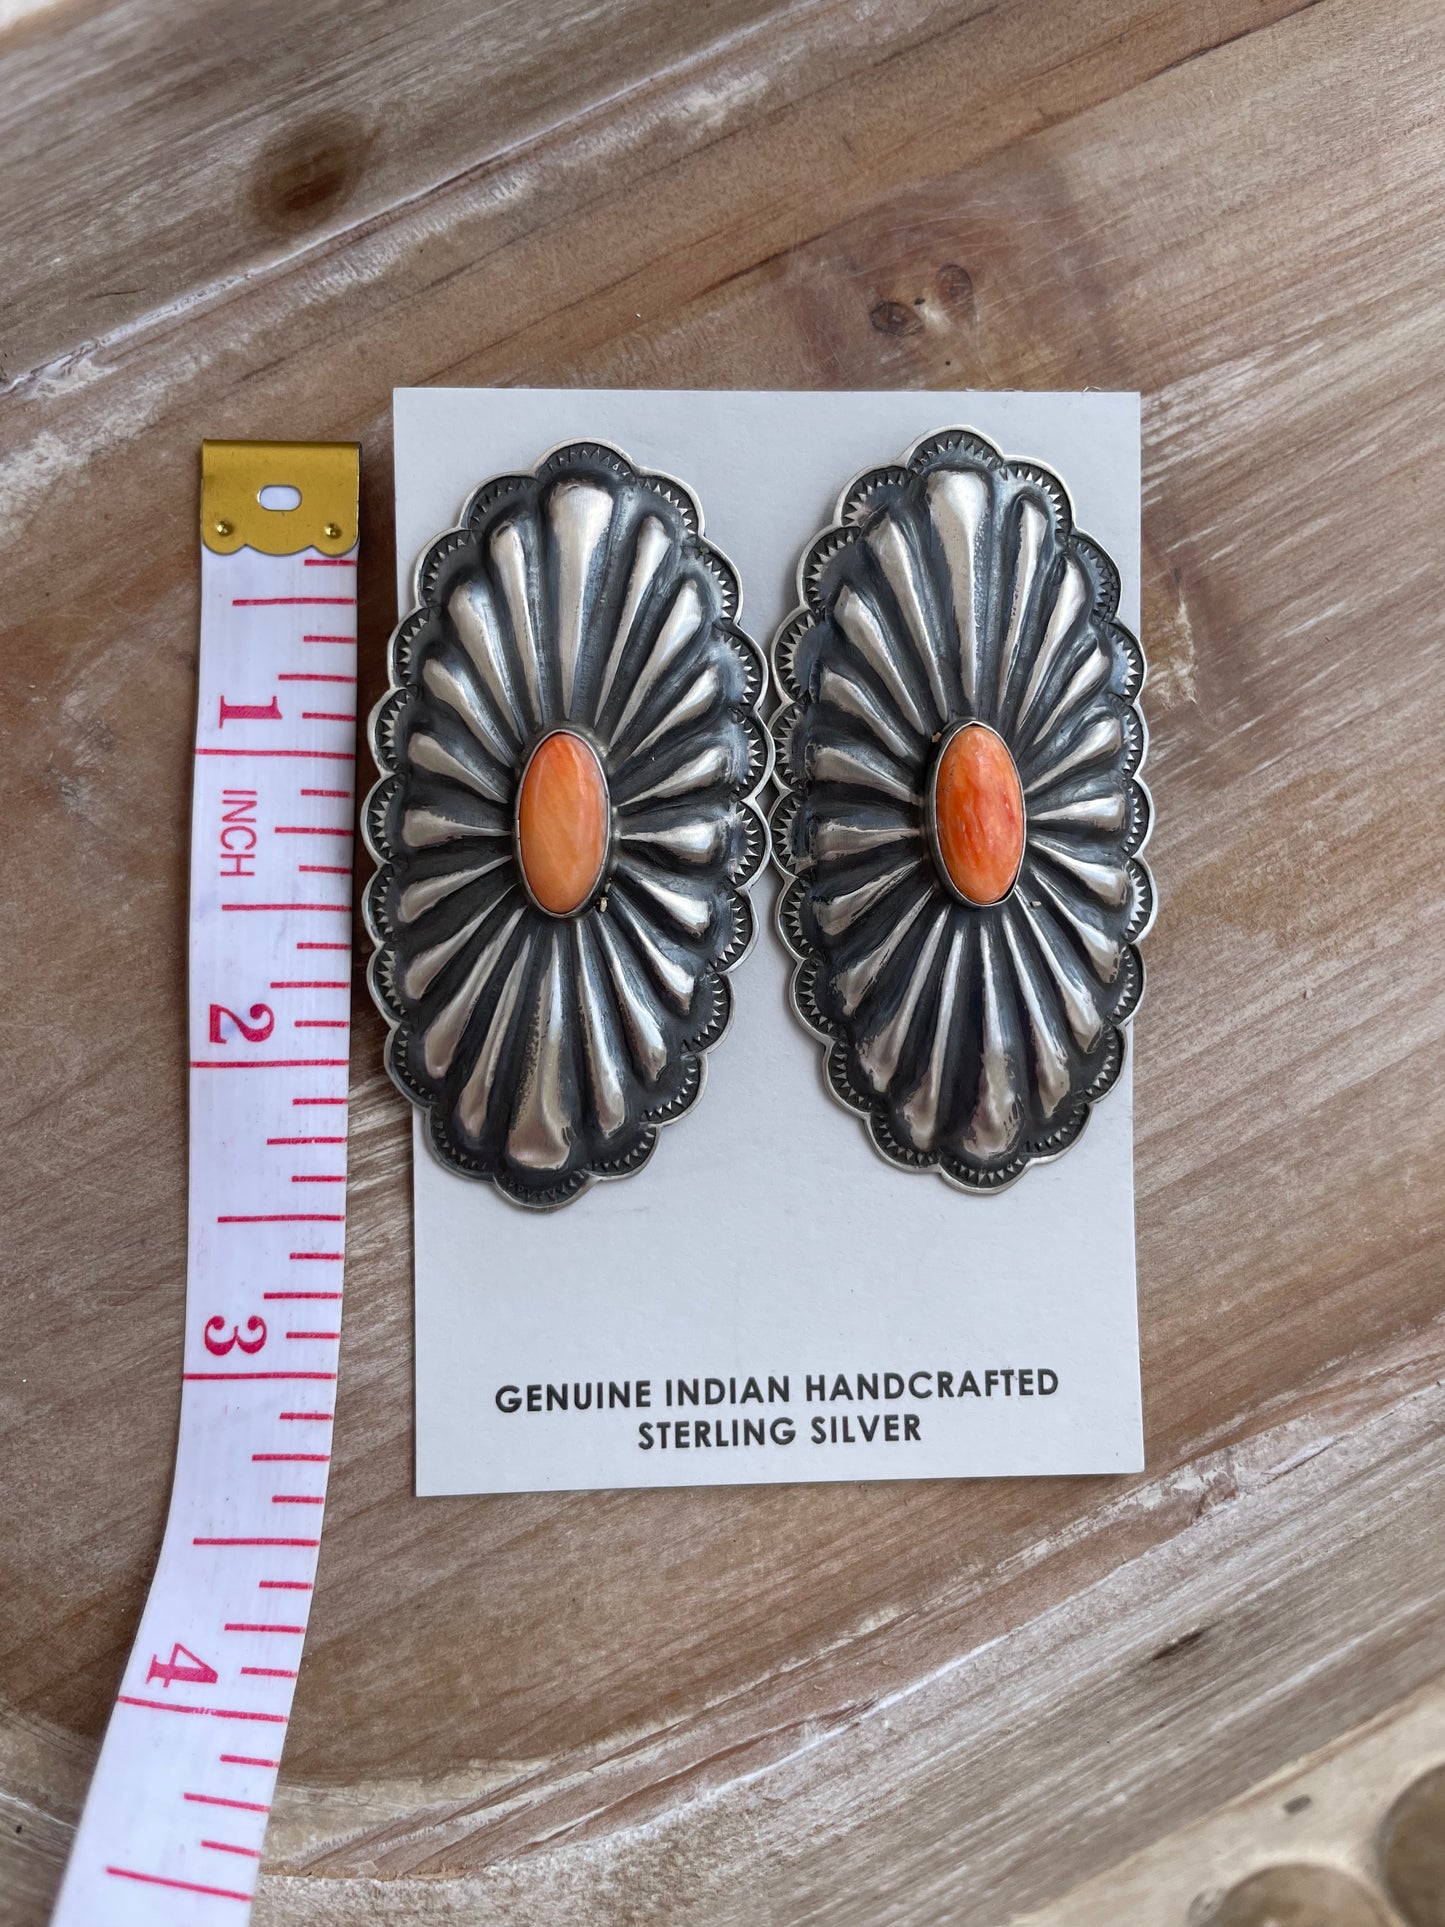 Mandy Navajo Hand Stamped Sterling Silver & Orange Spiny Concho Post Earrings